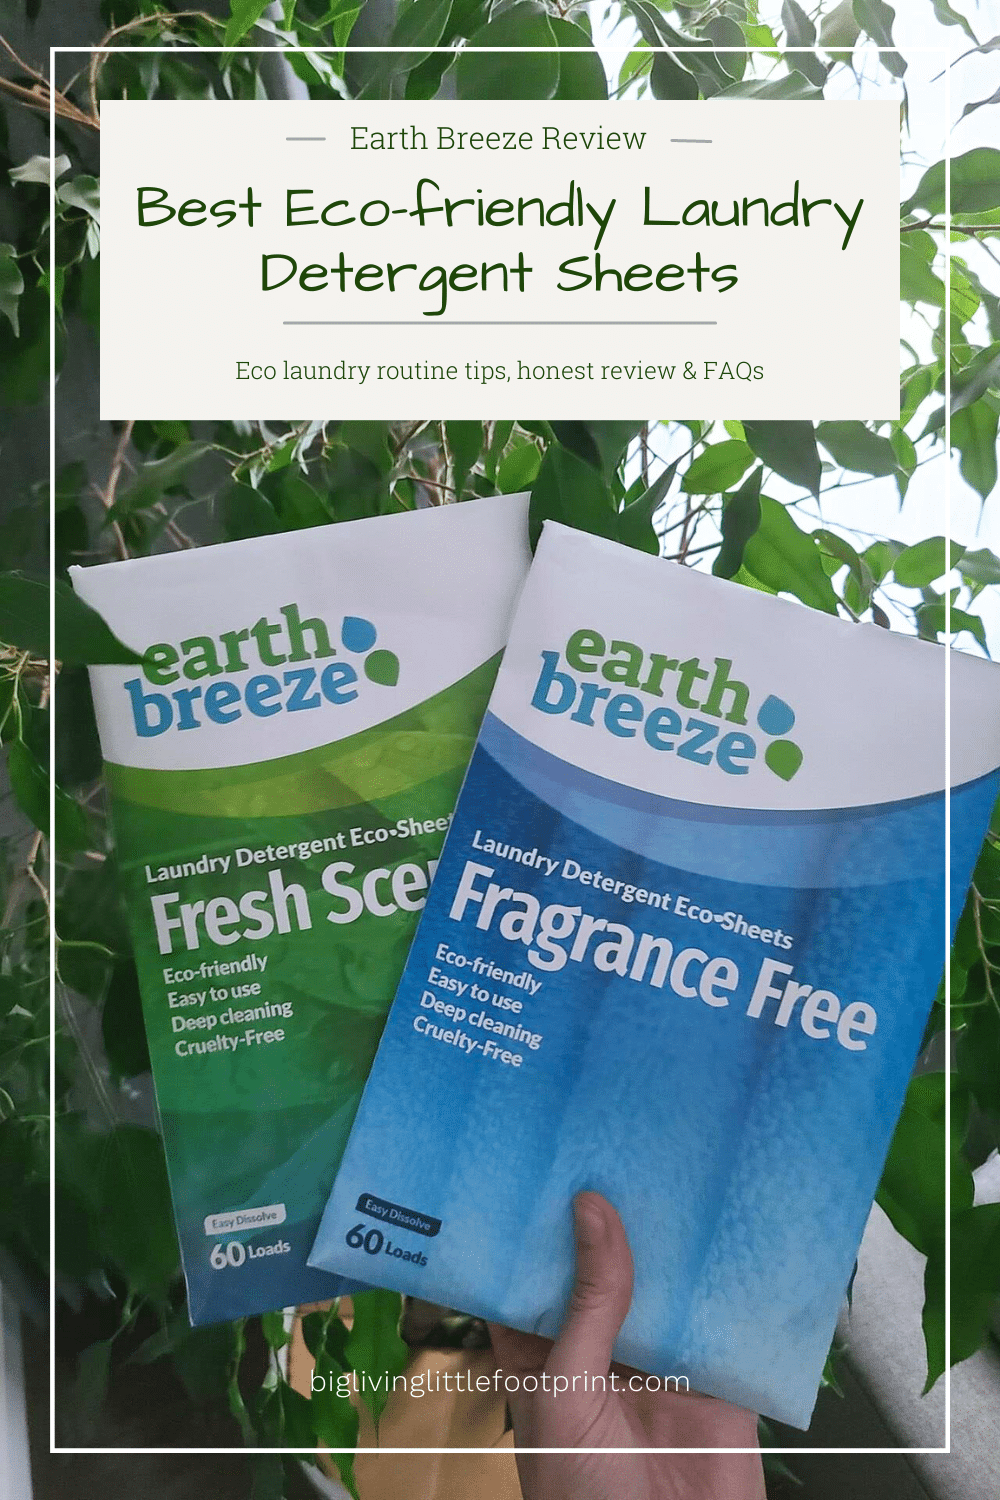 Earth Breeze Review – Best Eco-friendly Laundry Detergent Sheets